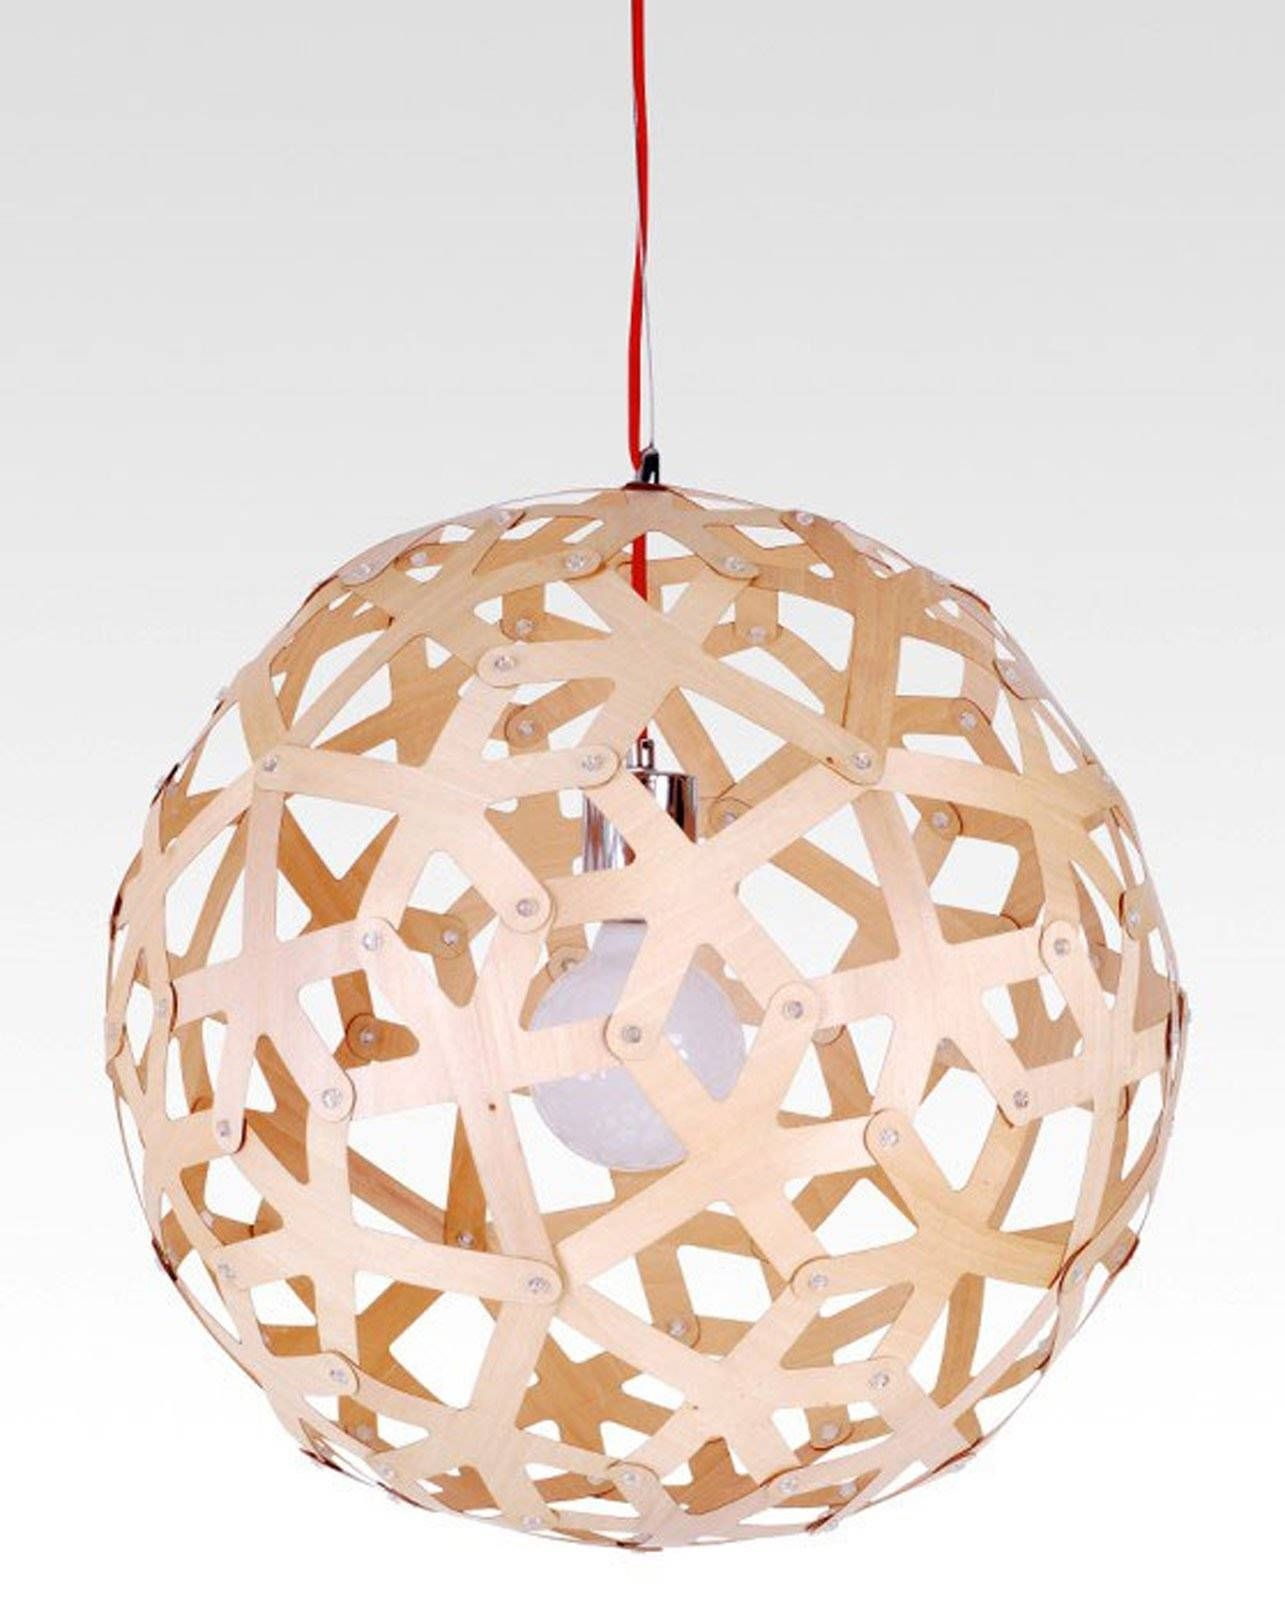 Buy Wood Pendant Light In Melbourne [sphere] – Youtube In Bent Wood Pendant Lights (View 3 of 15)